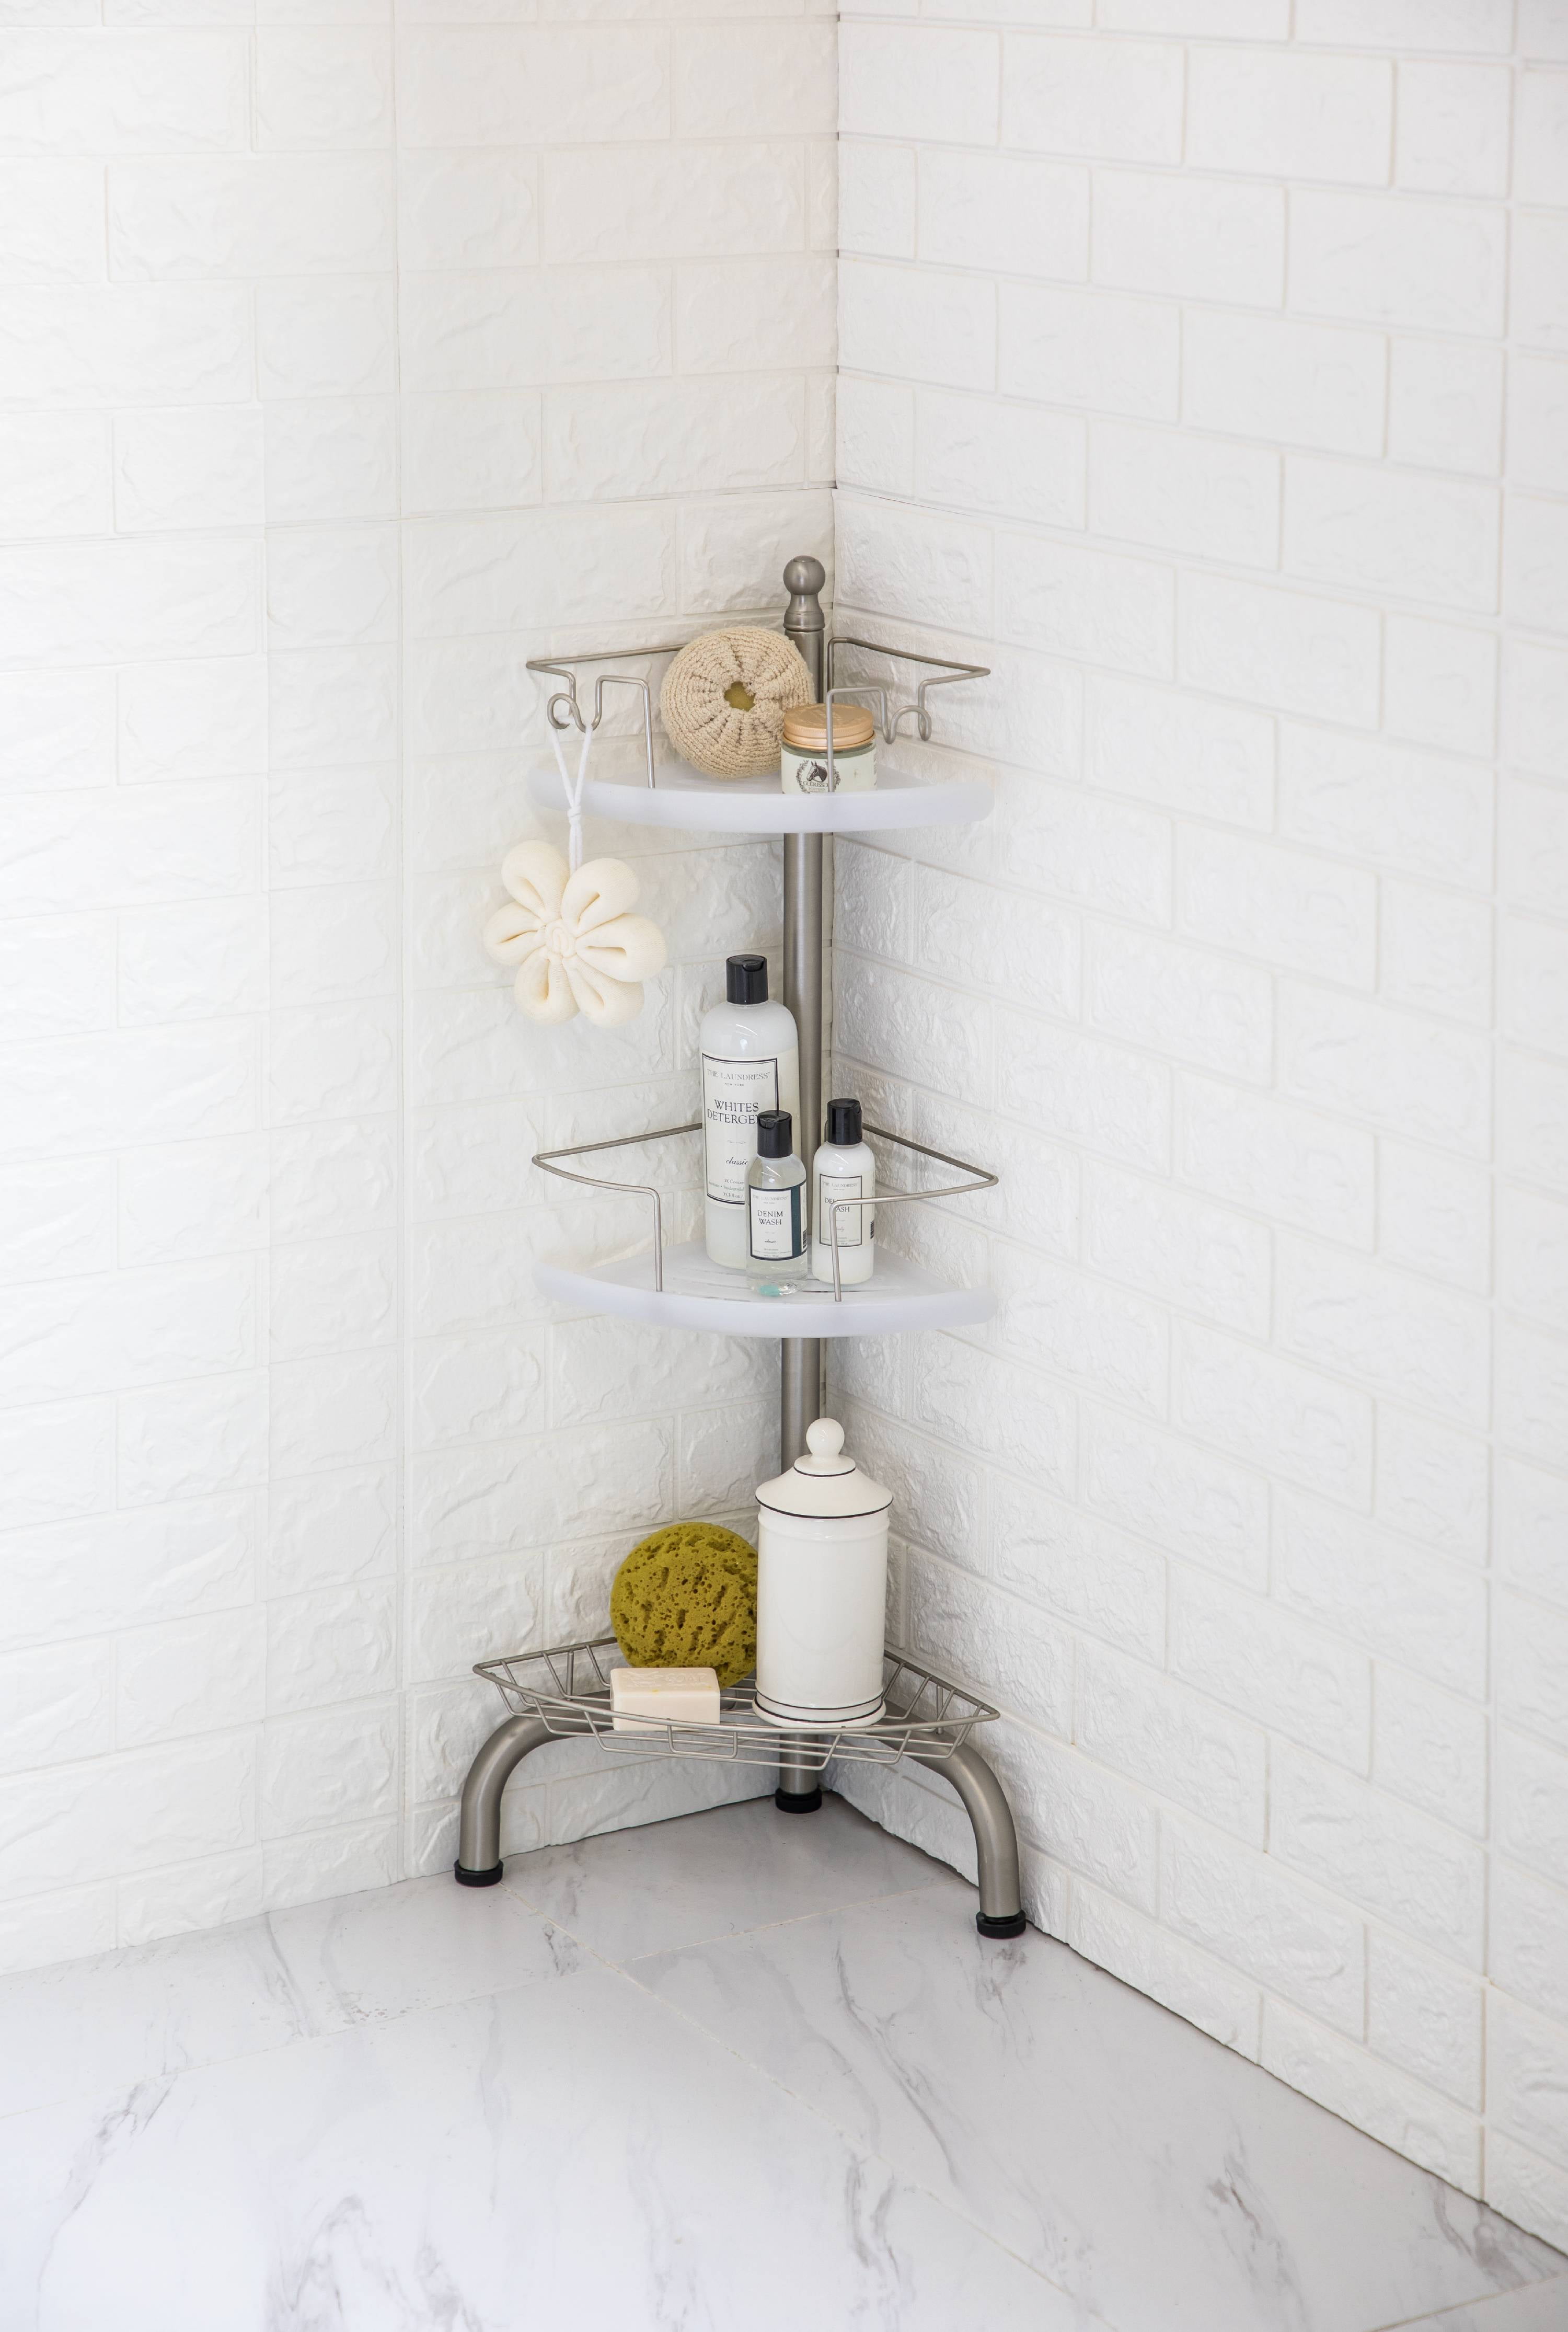 3-Tier Chrome Shower Caddy With Suction Fix - Home Store + More